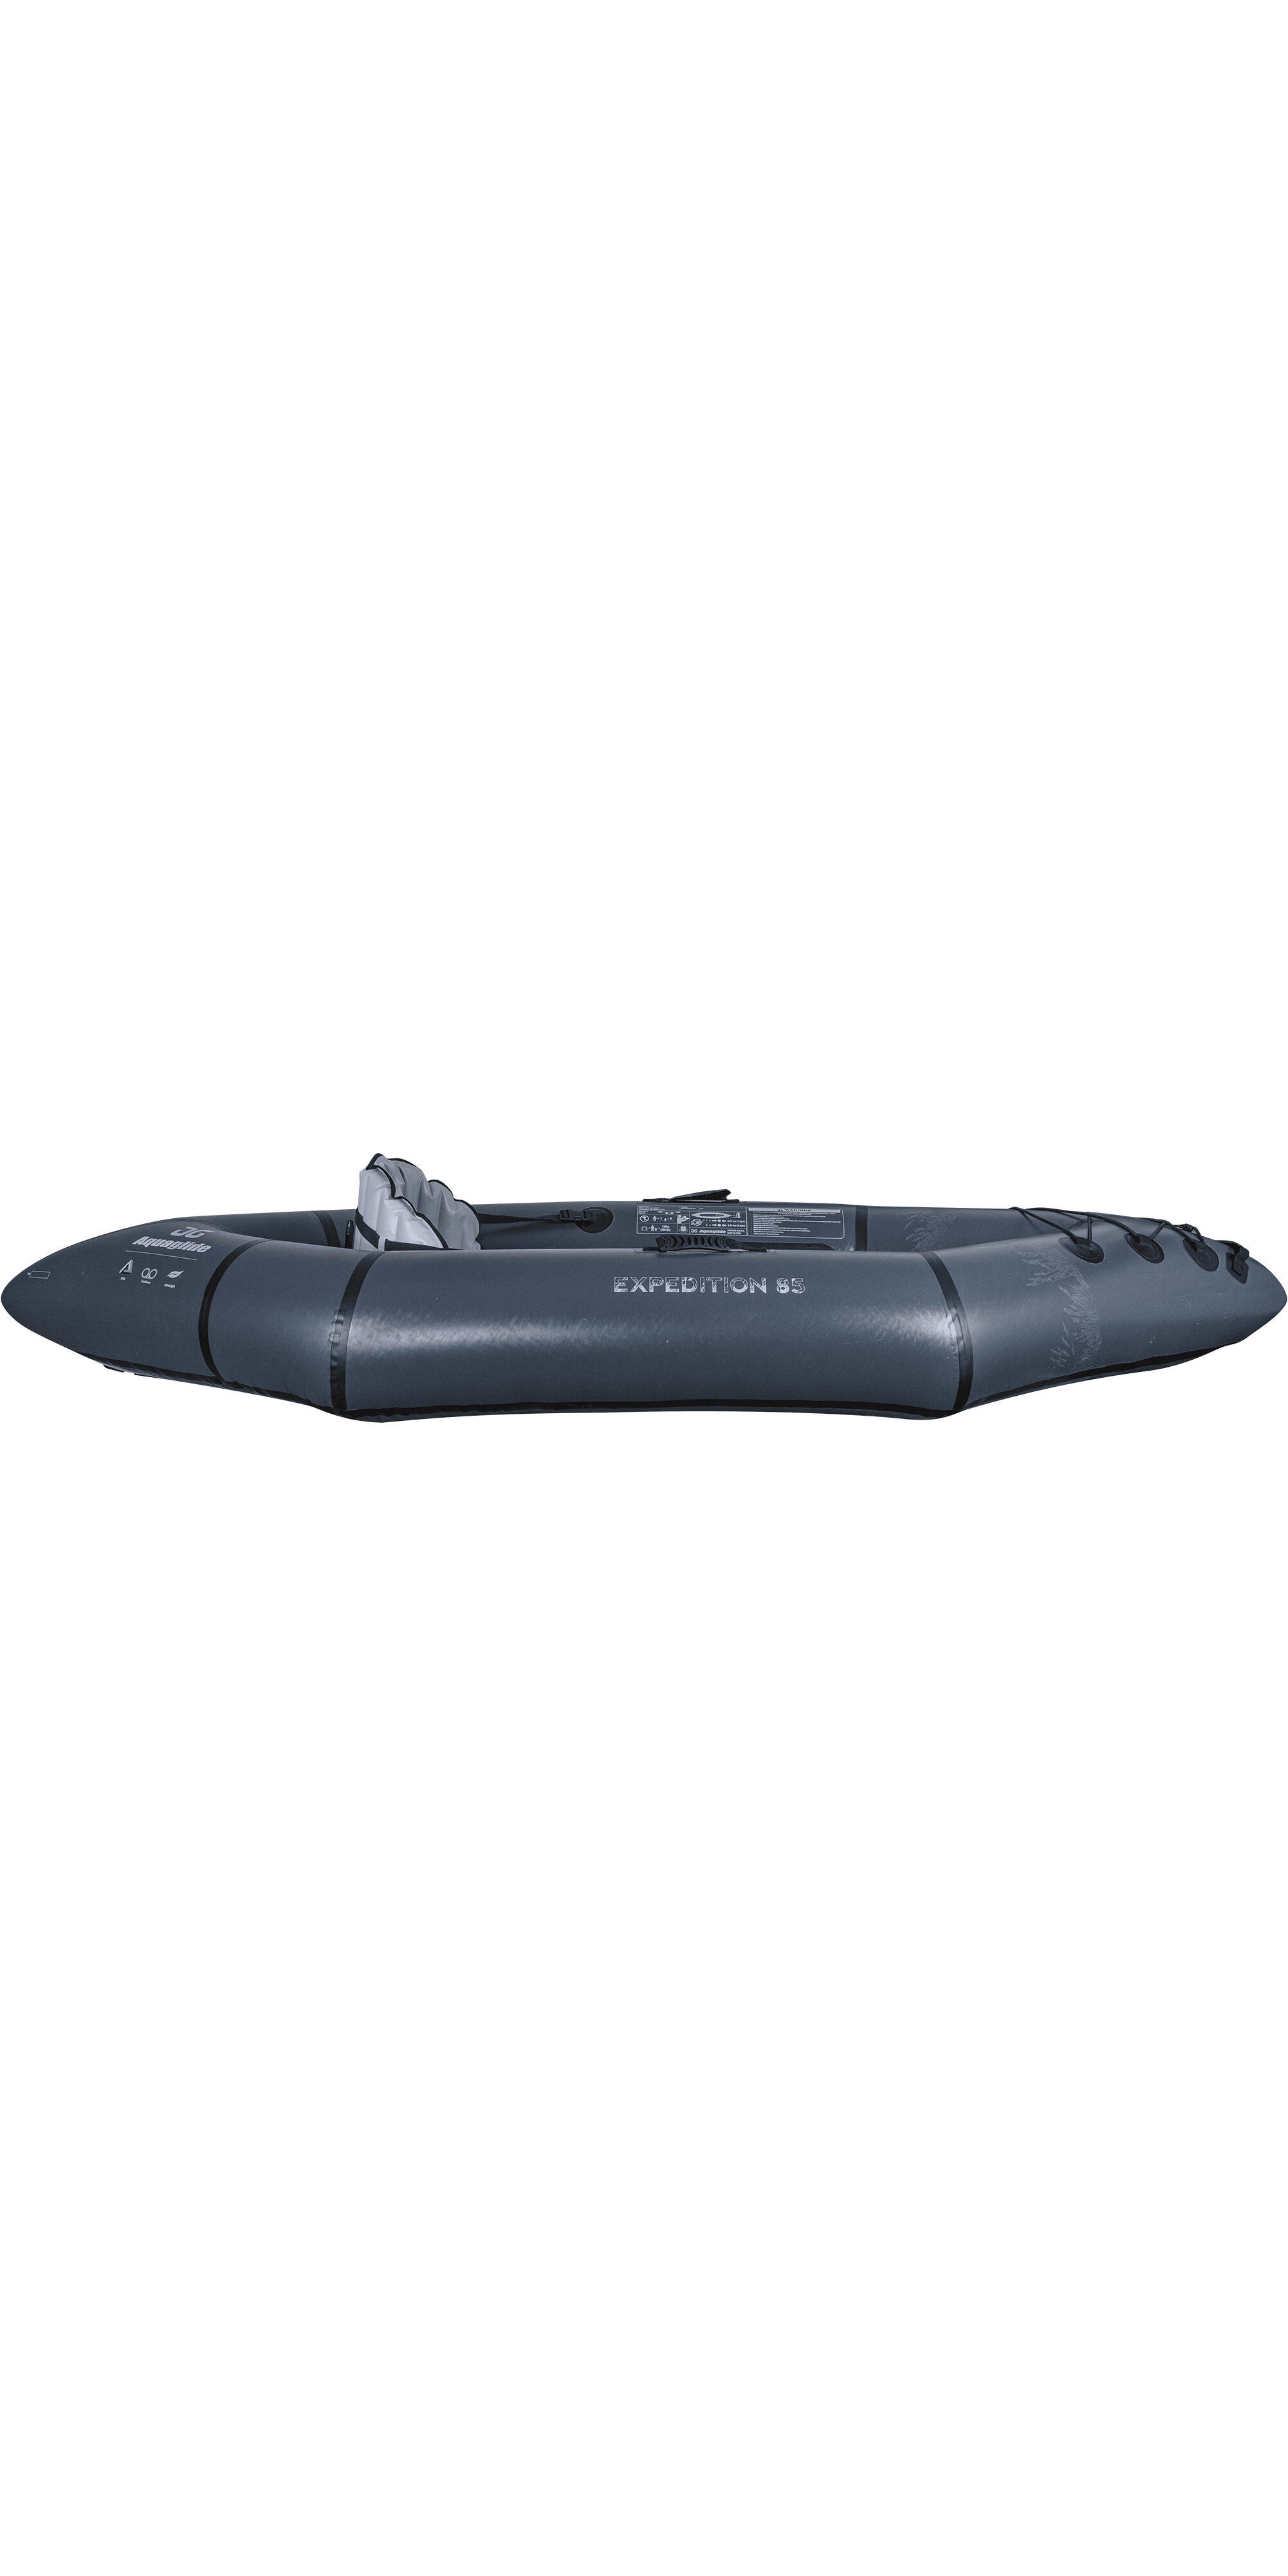 Backwoods Expedition 85 Ultralight 1 Person Kayak - Navy 2/4